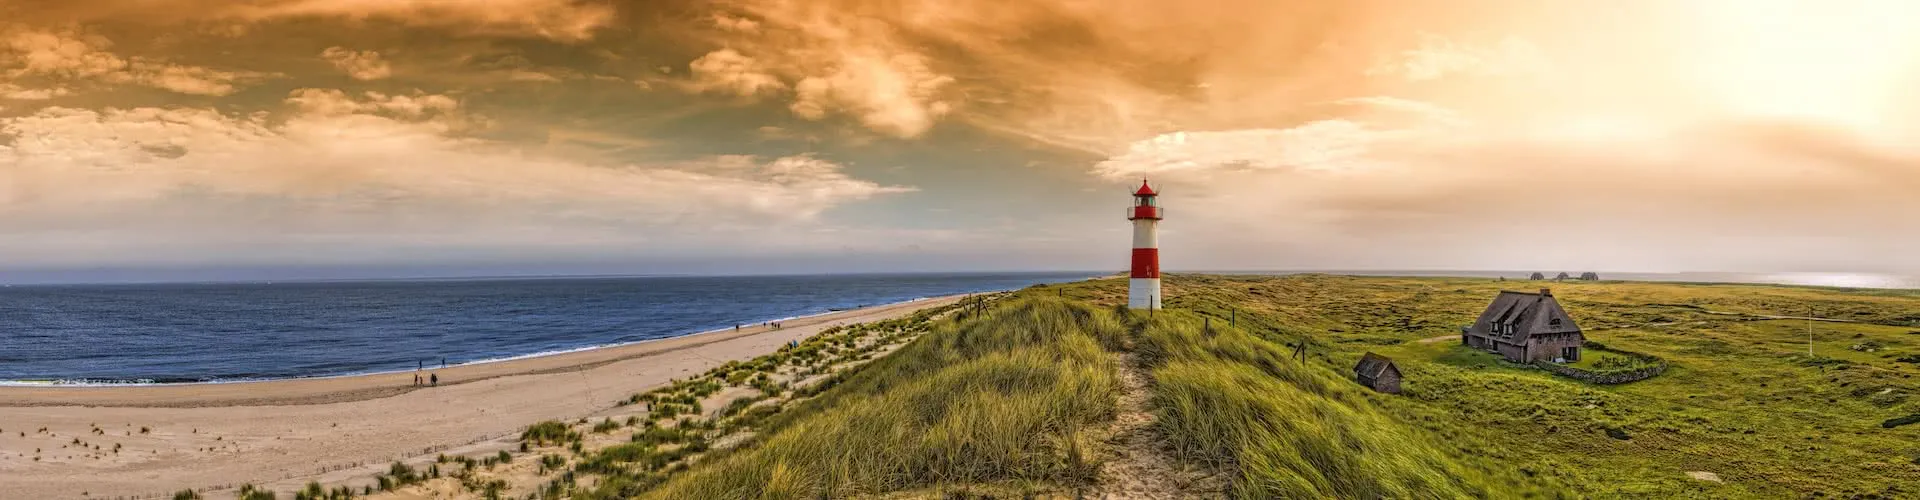 Sylt - the destination with youth hostels